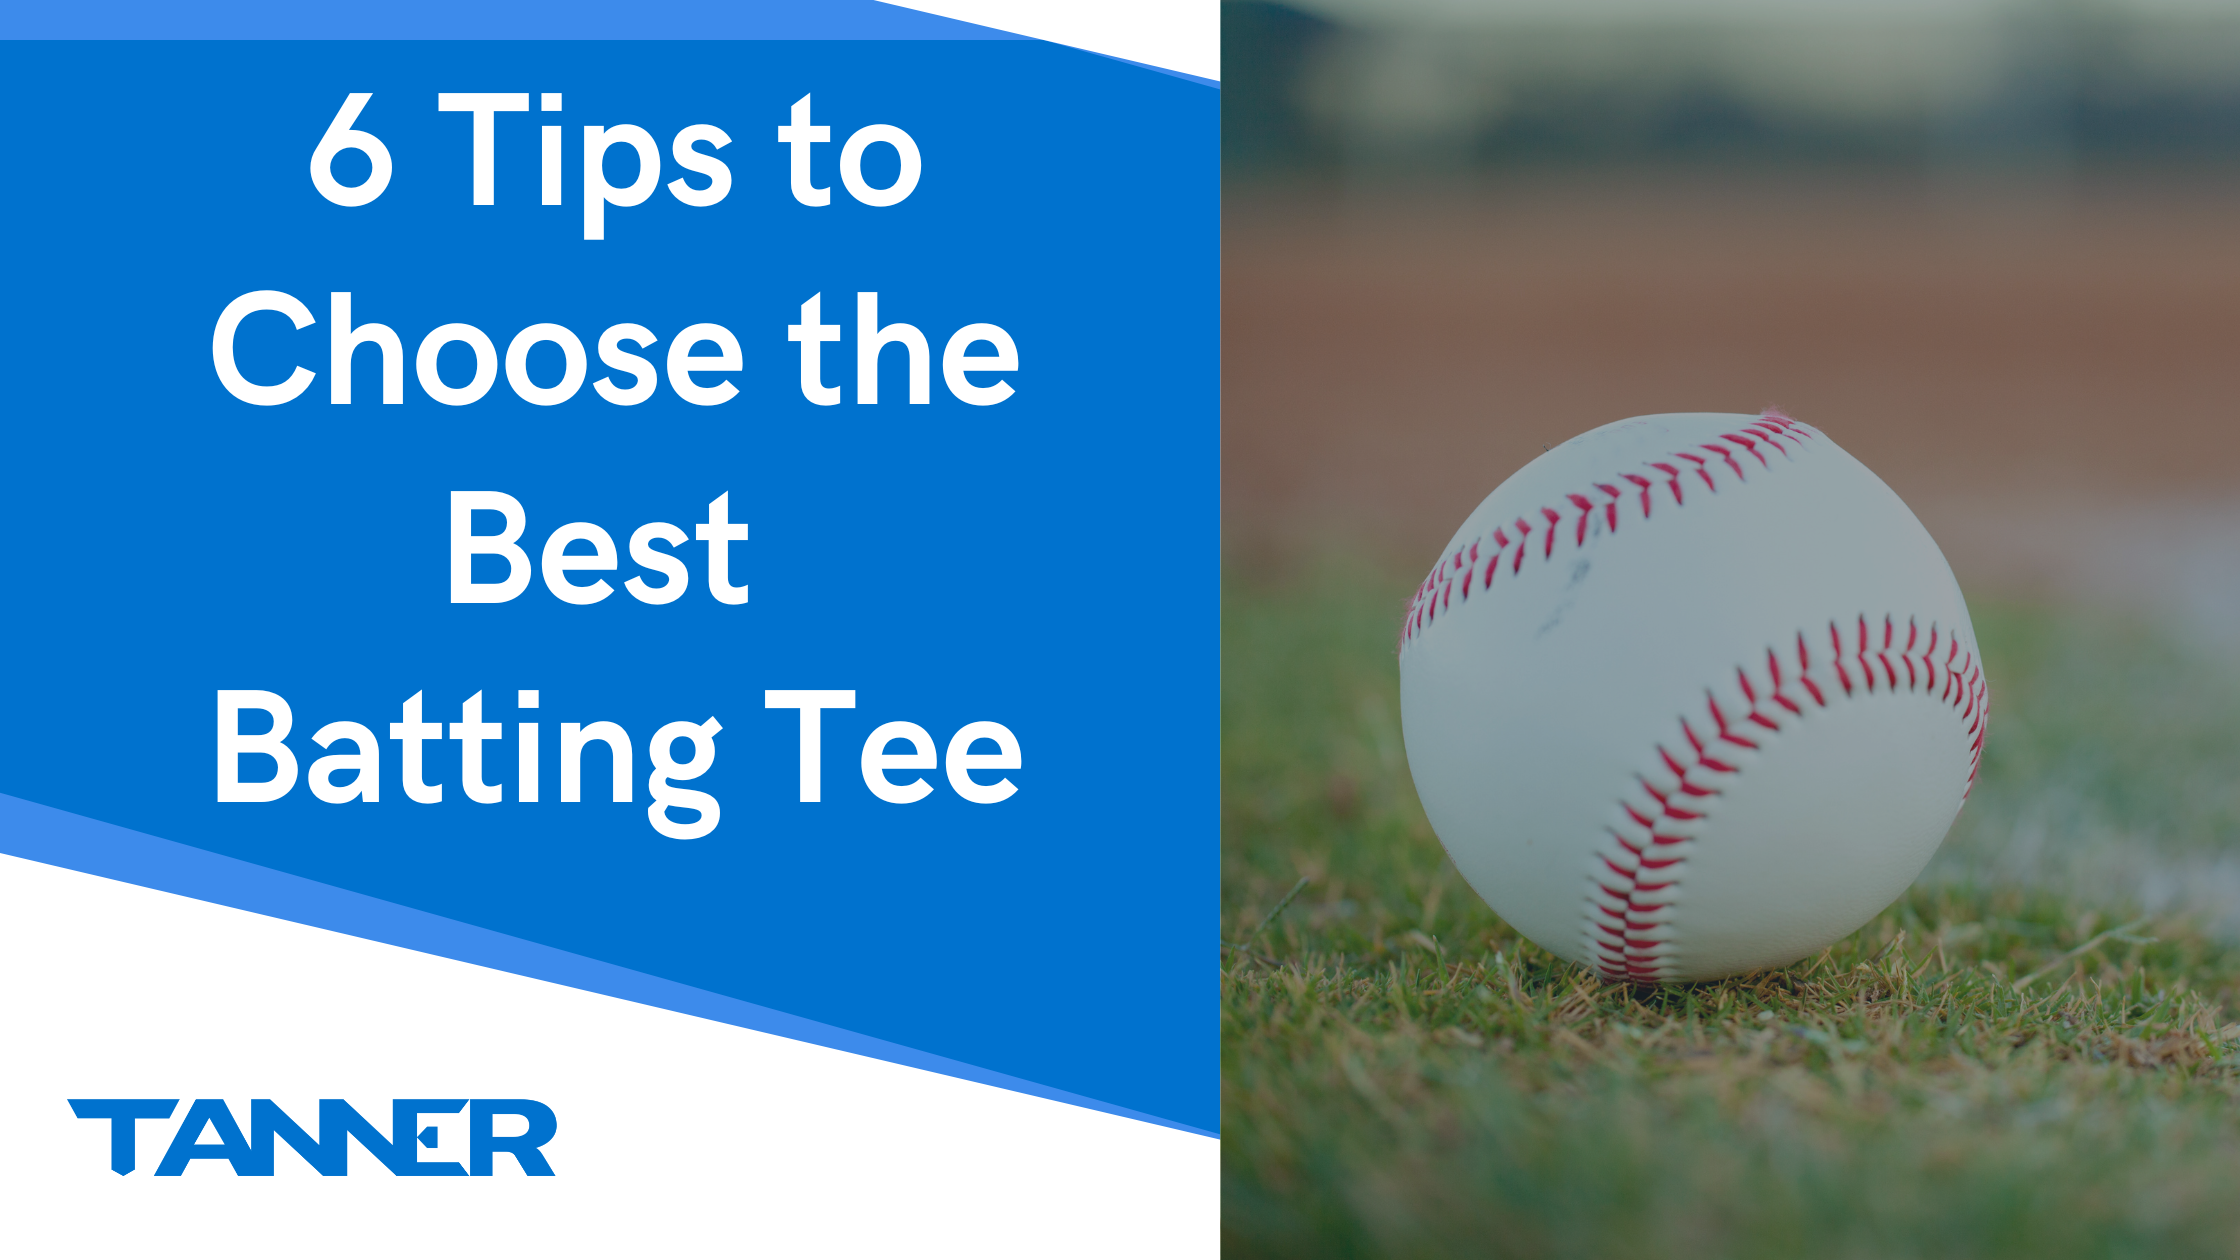 6 Tips to Choose the Best Batting Tee